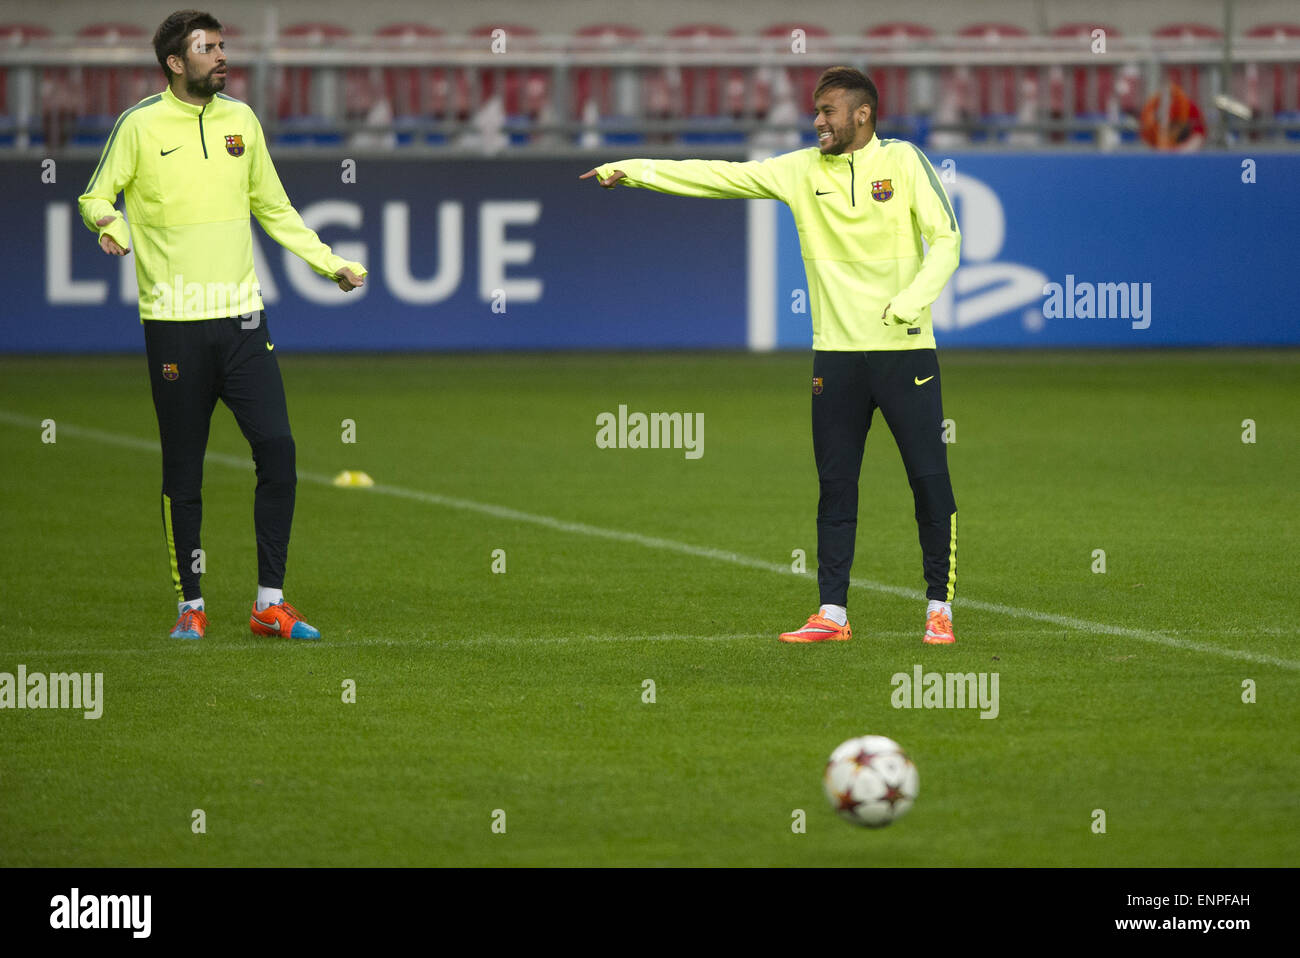 Barcelona football team training in the Amsterdam ArenA ahead of their champions league match against Ajax  Featuring: NEYMAR Where: Amsterdam, Netherlands When: 04 Nov 2014 Stock Photo